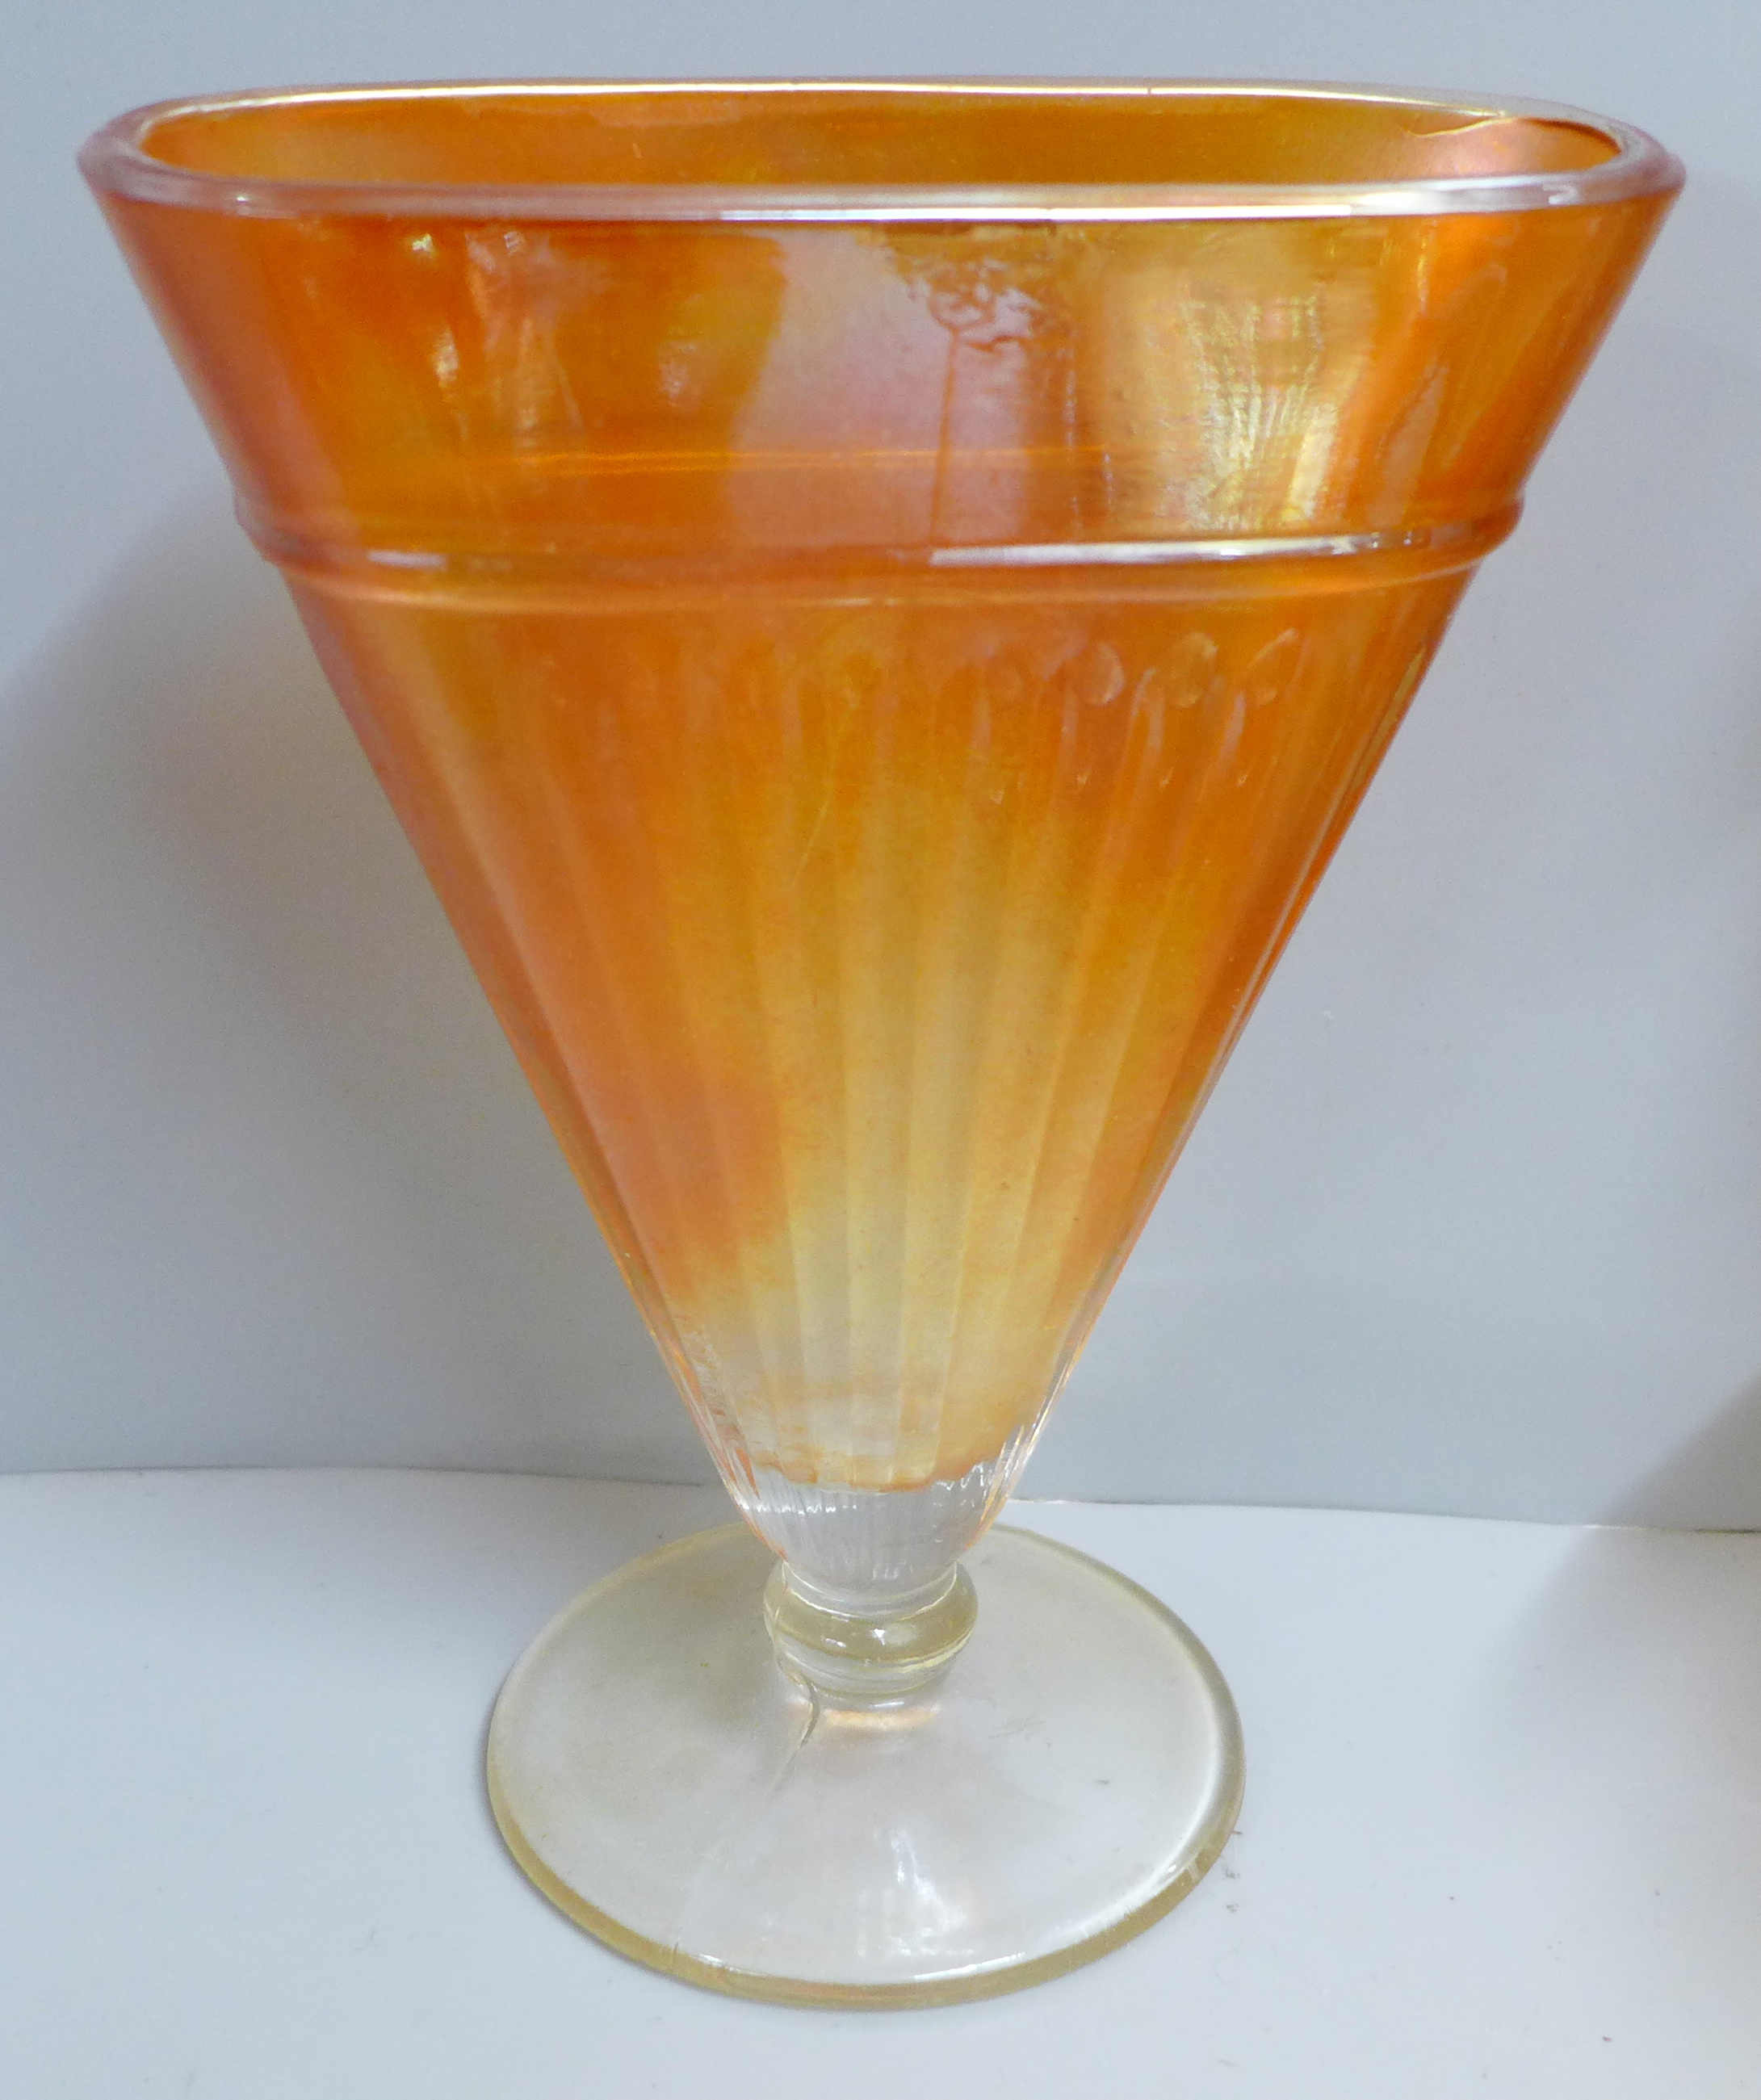 Ten items of marigold carnival glass, a crackle glaze celery vase, iridescent dished and bowls, - Image 5 of 8